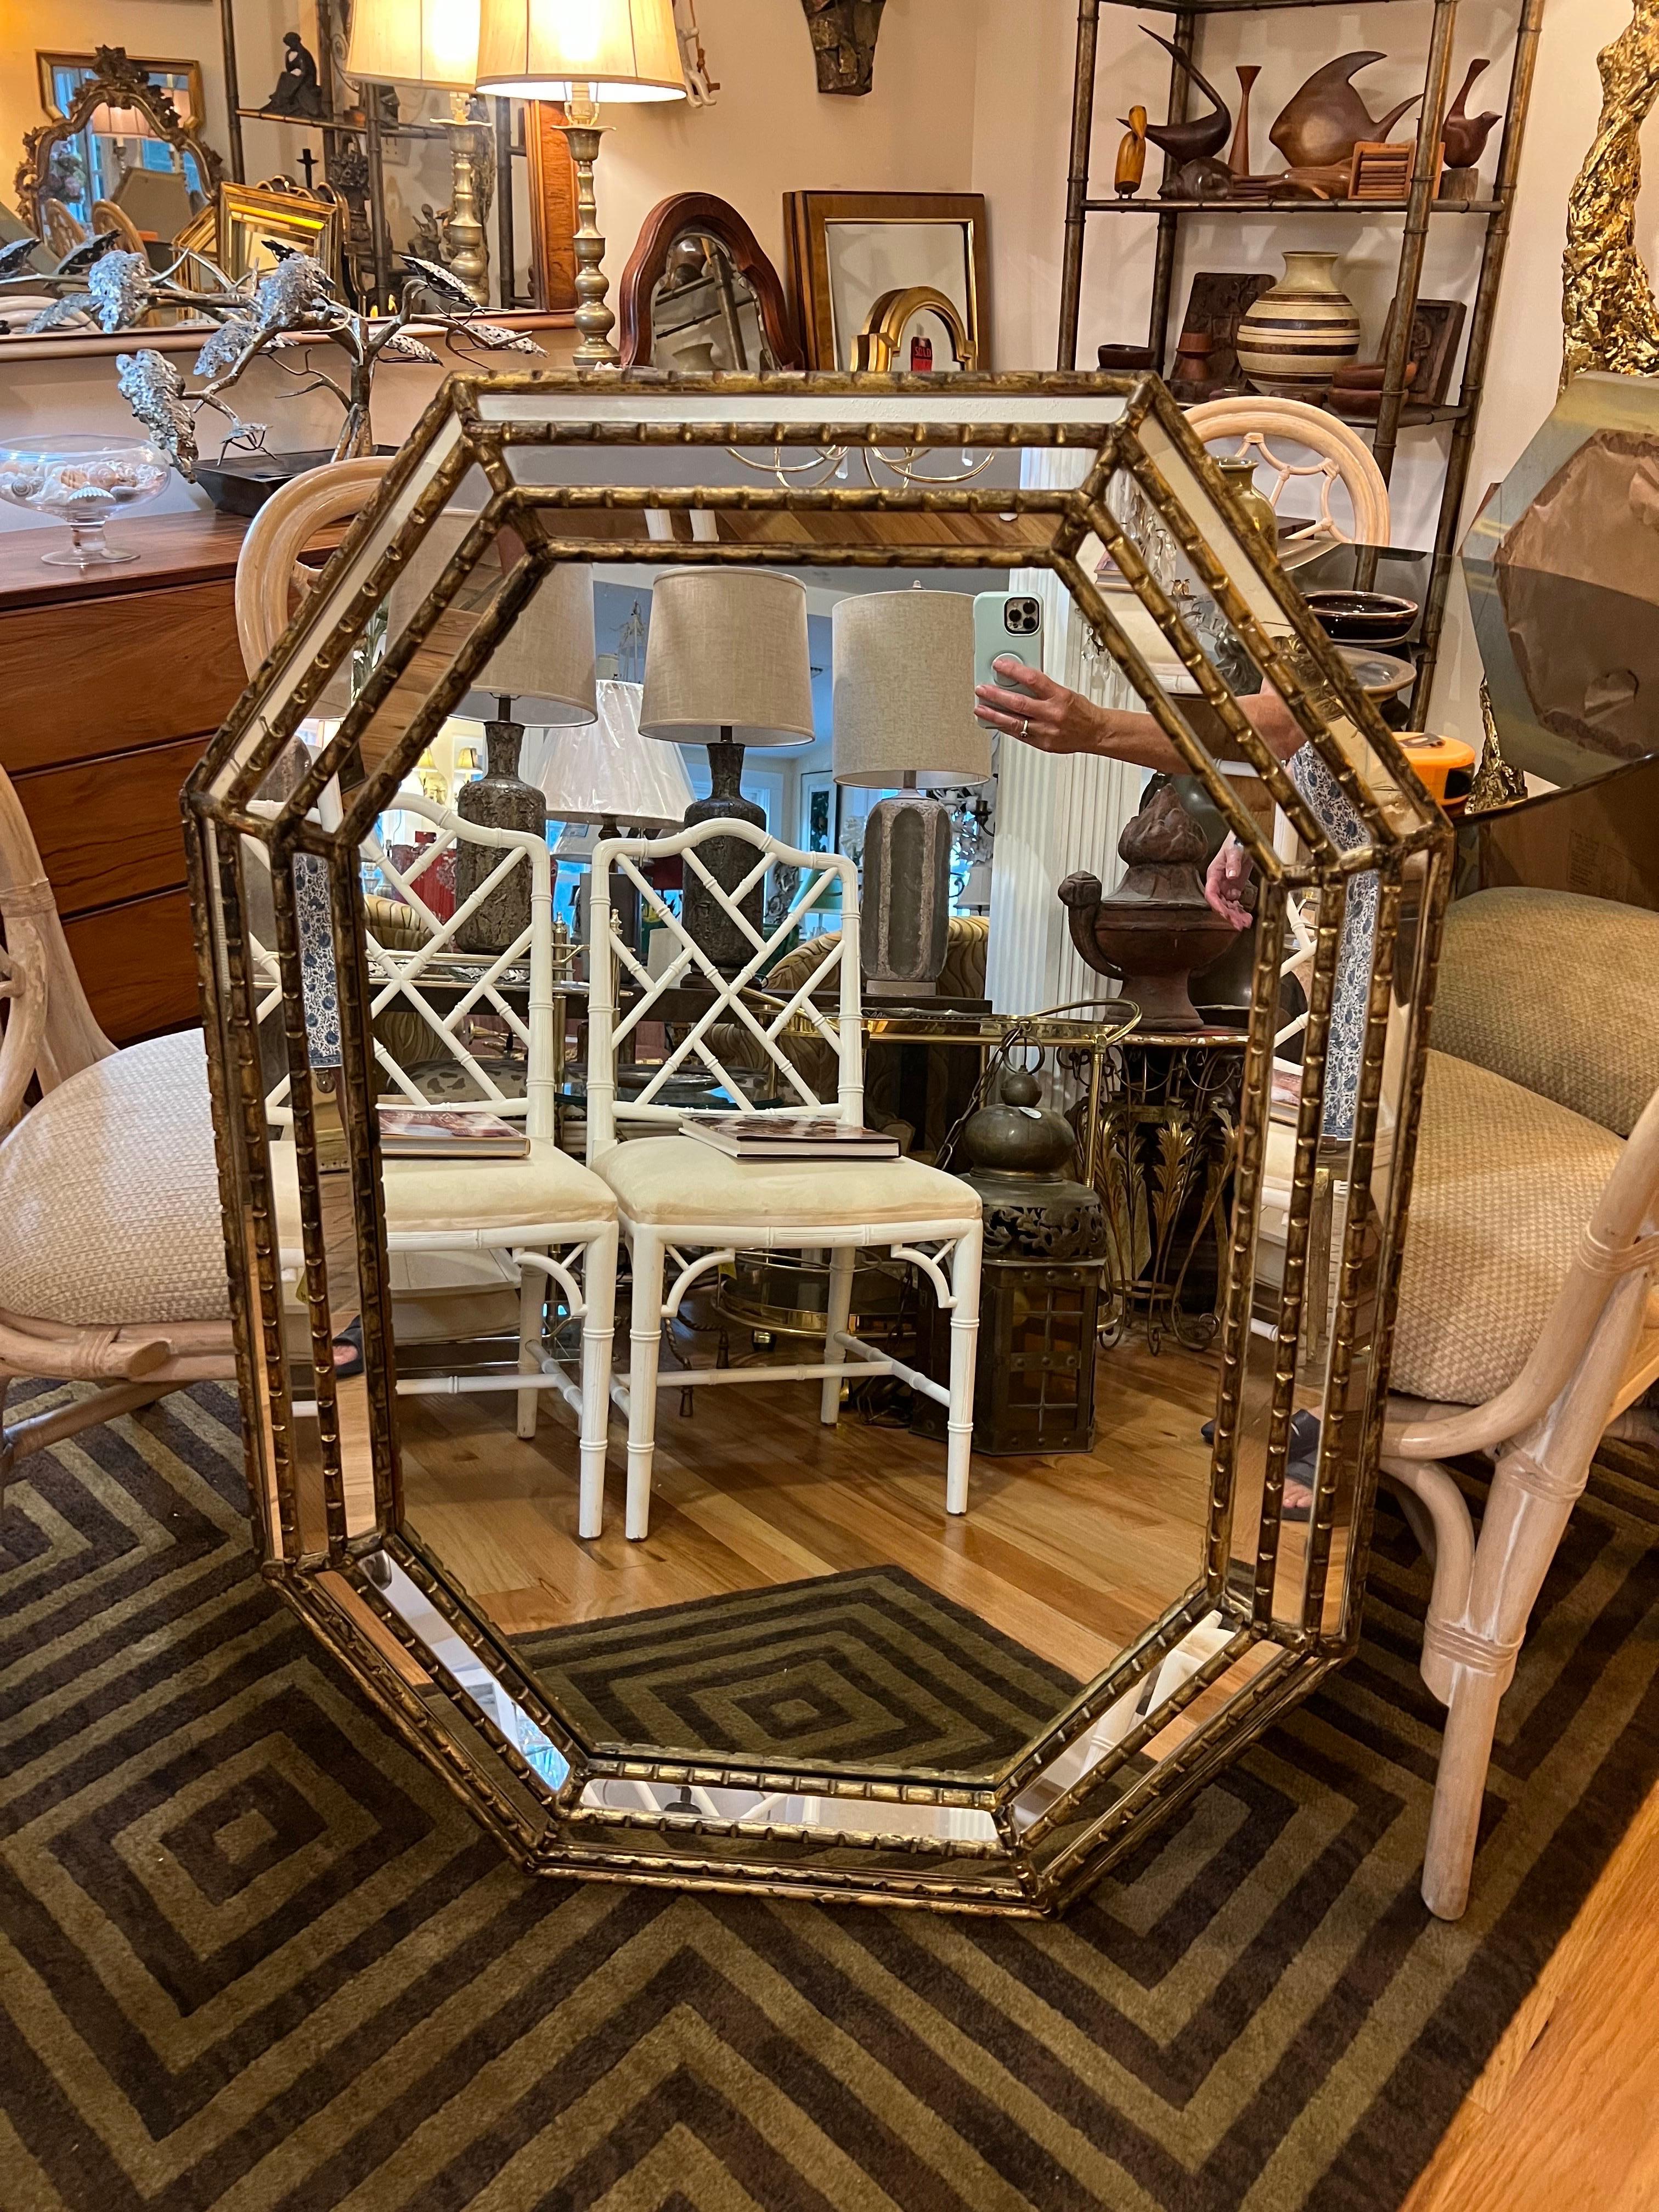 LaBarge Style octagonal gilt mirror. Thick triple Beveled edges and wide frame make up this beauty. Interesting octagonal shape. Perfect for a hallway or above a vanity.
Solid wood and very well made piece. Back when they made things right and they